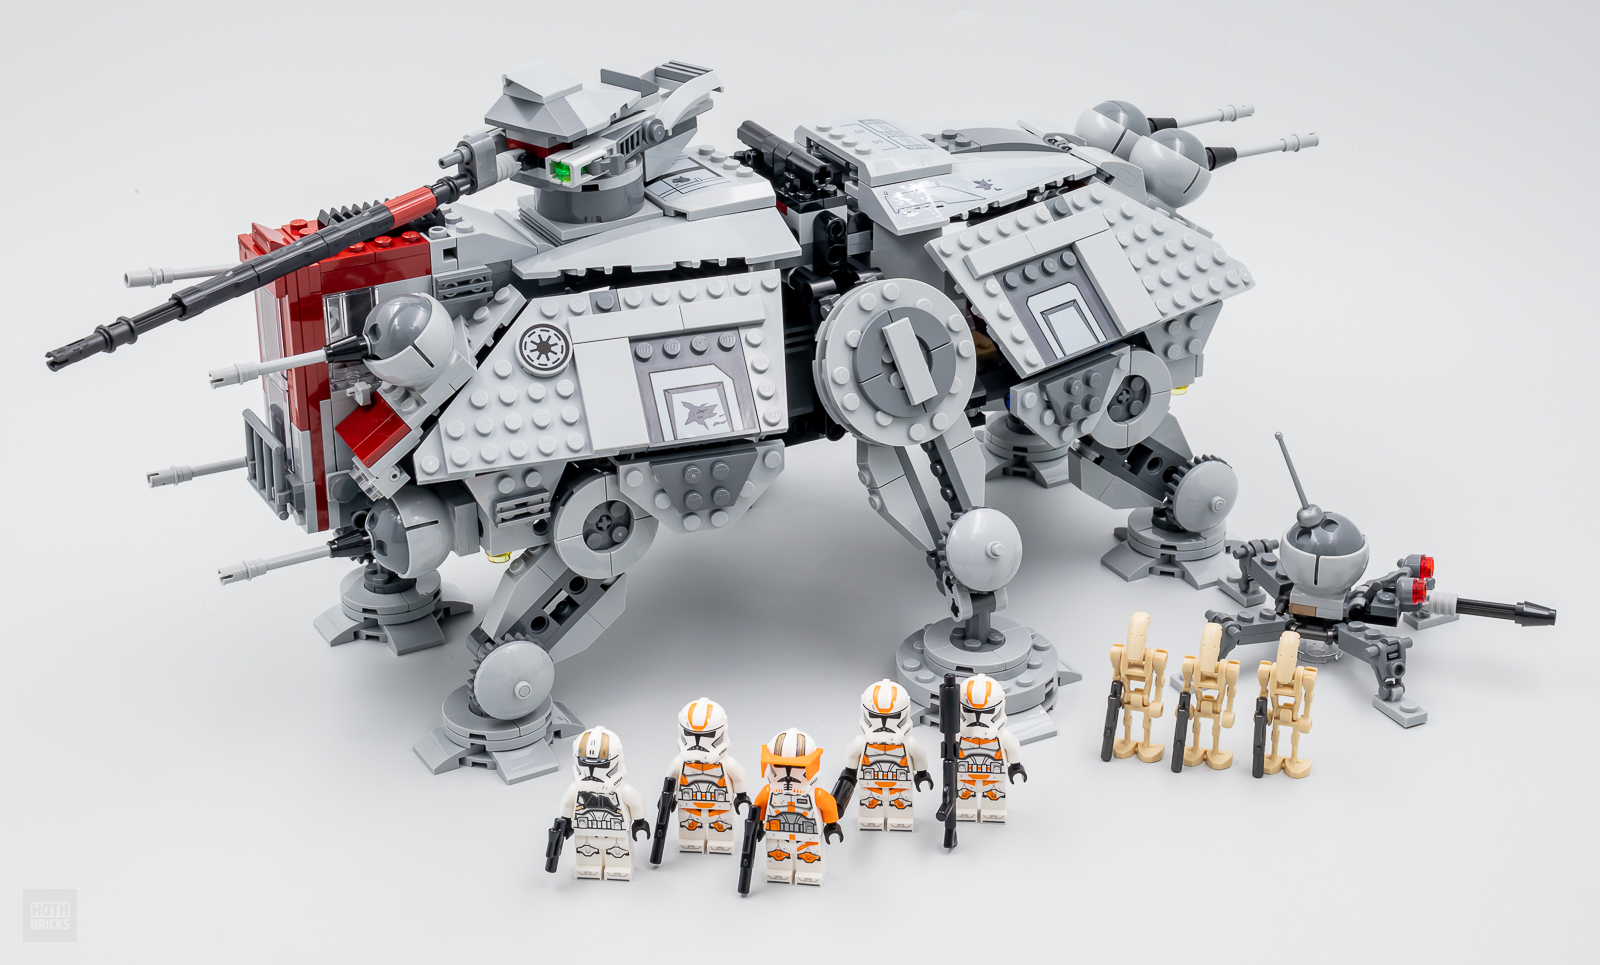 75337 AT-TE Walker is one of the best LEGO Star Wars sets